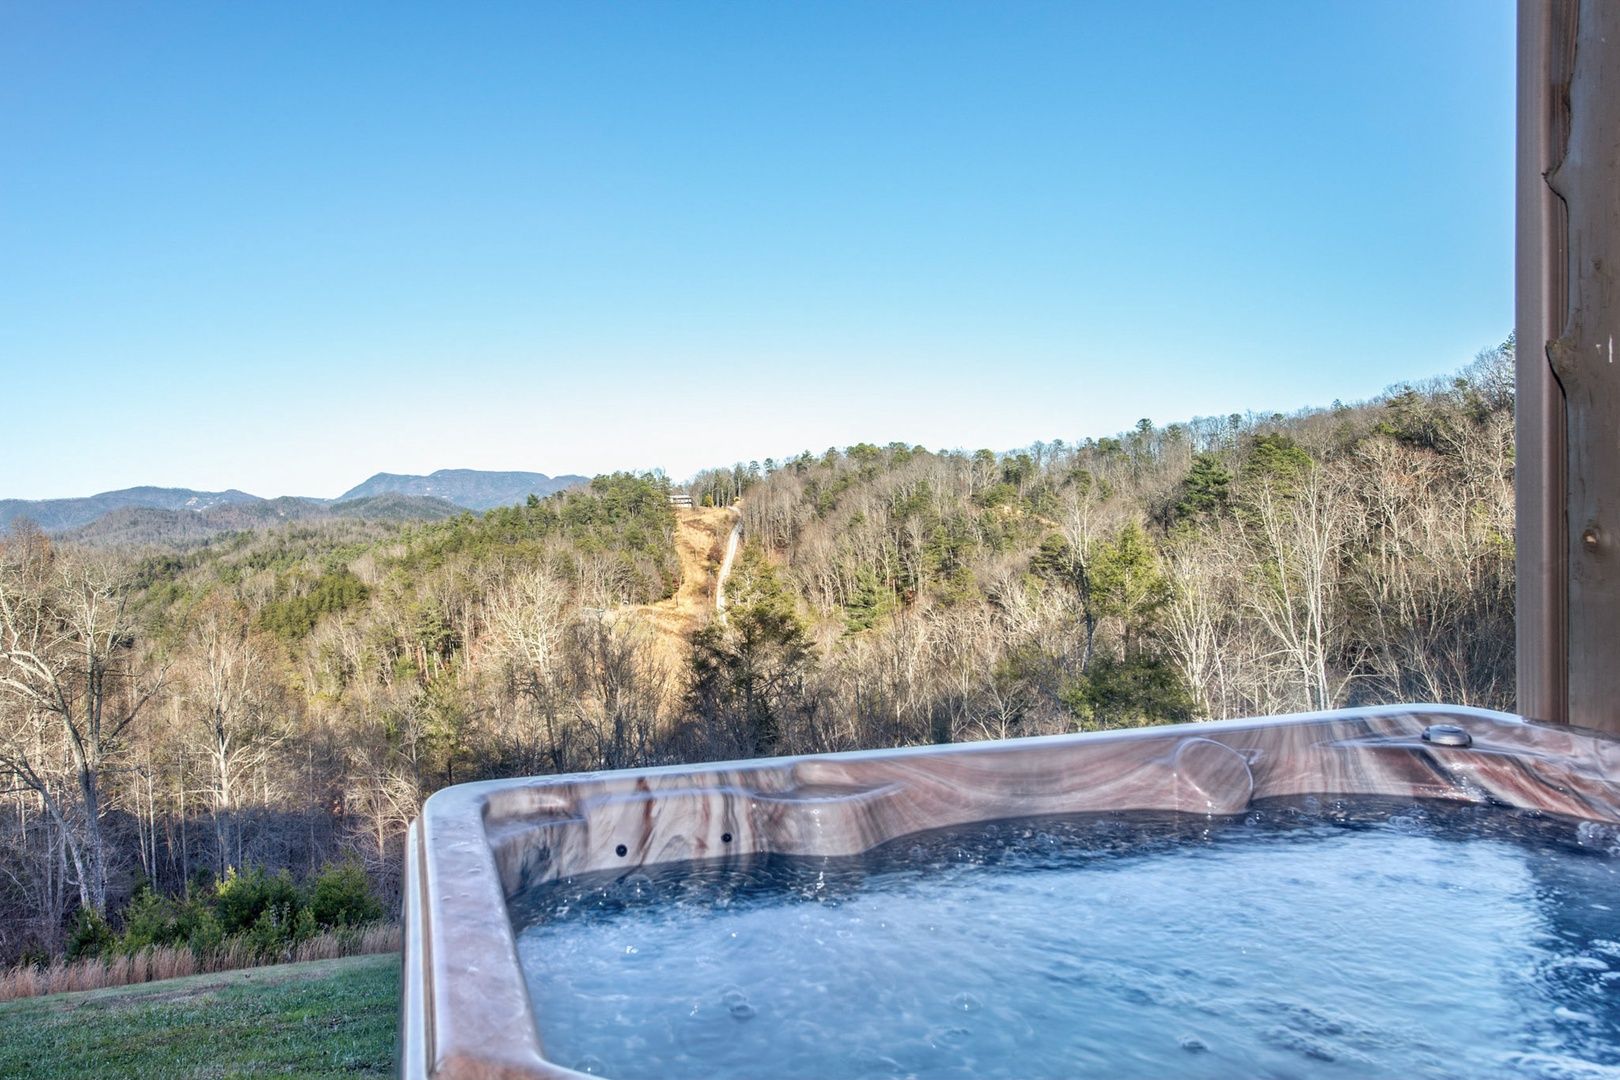 Relax in the private hot tub, soaking in the views throughout the day